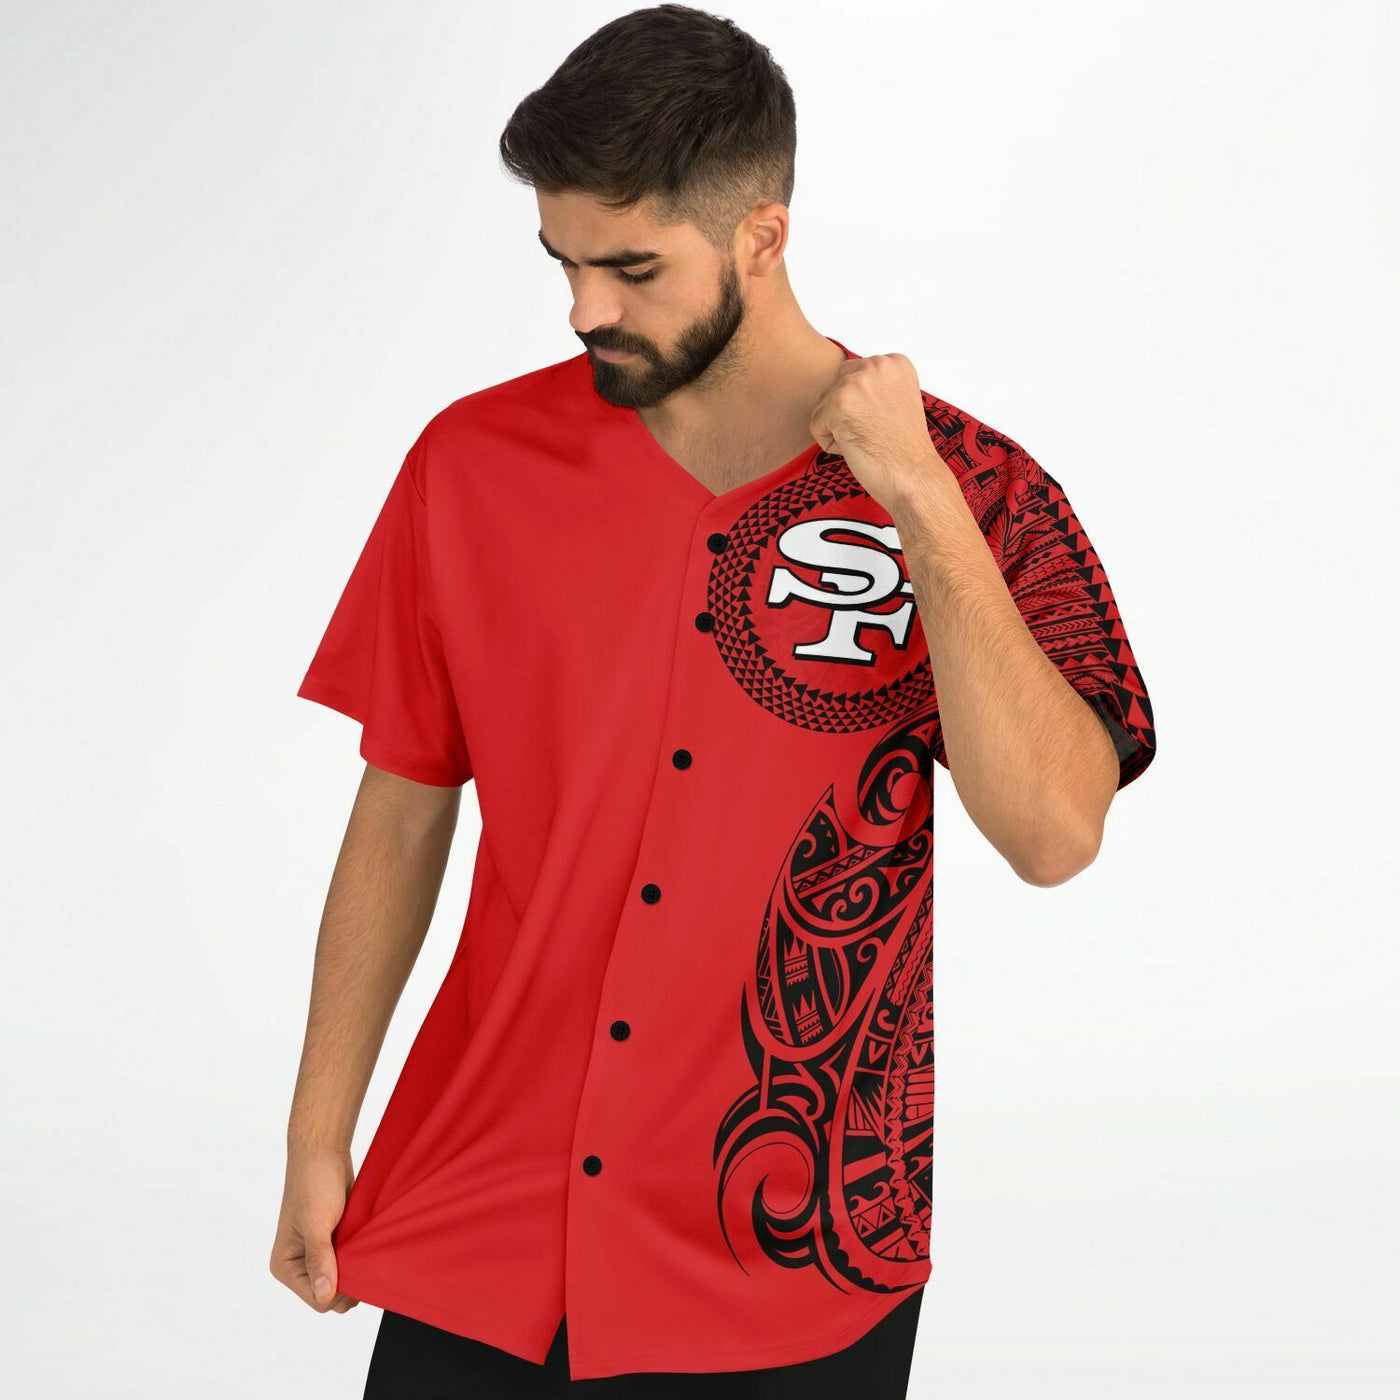 black and red st louis cardinals jersey